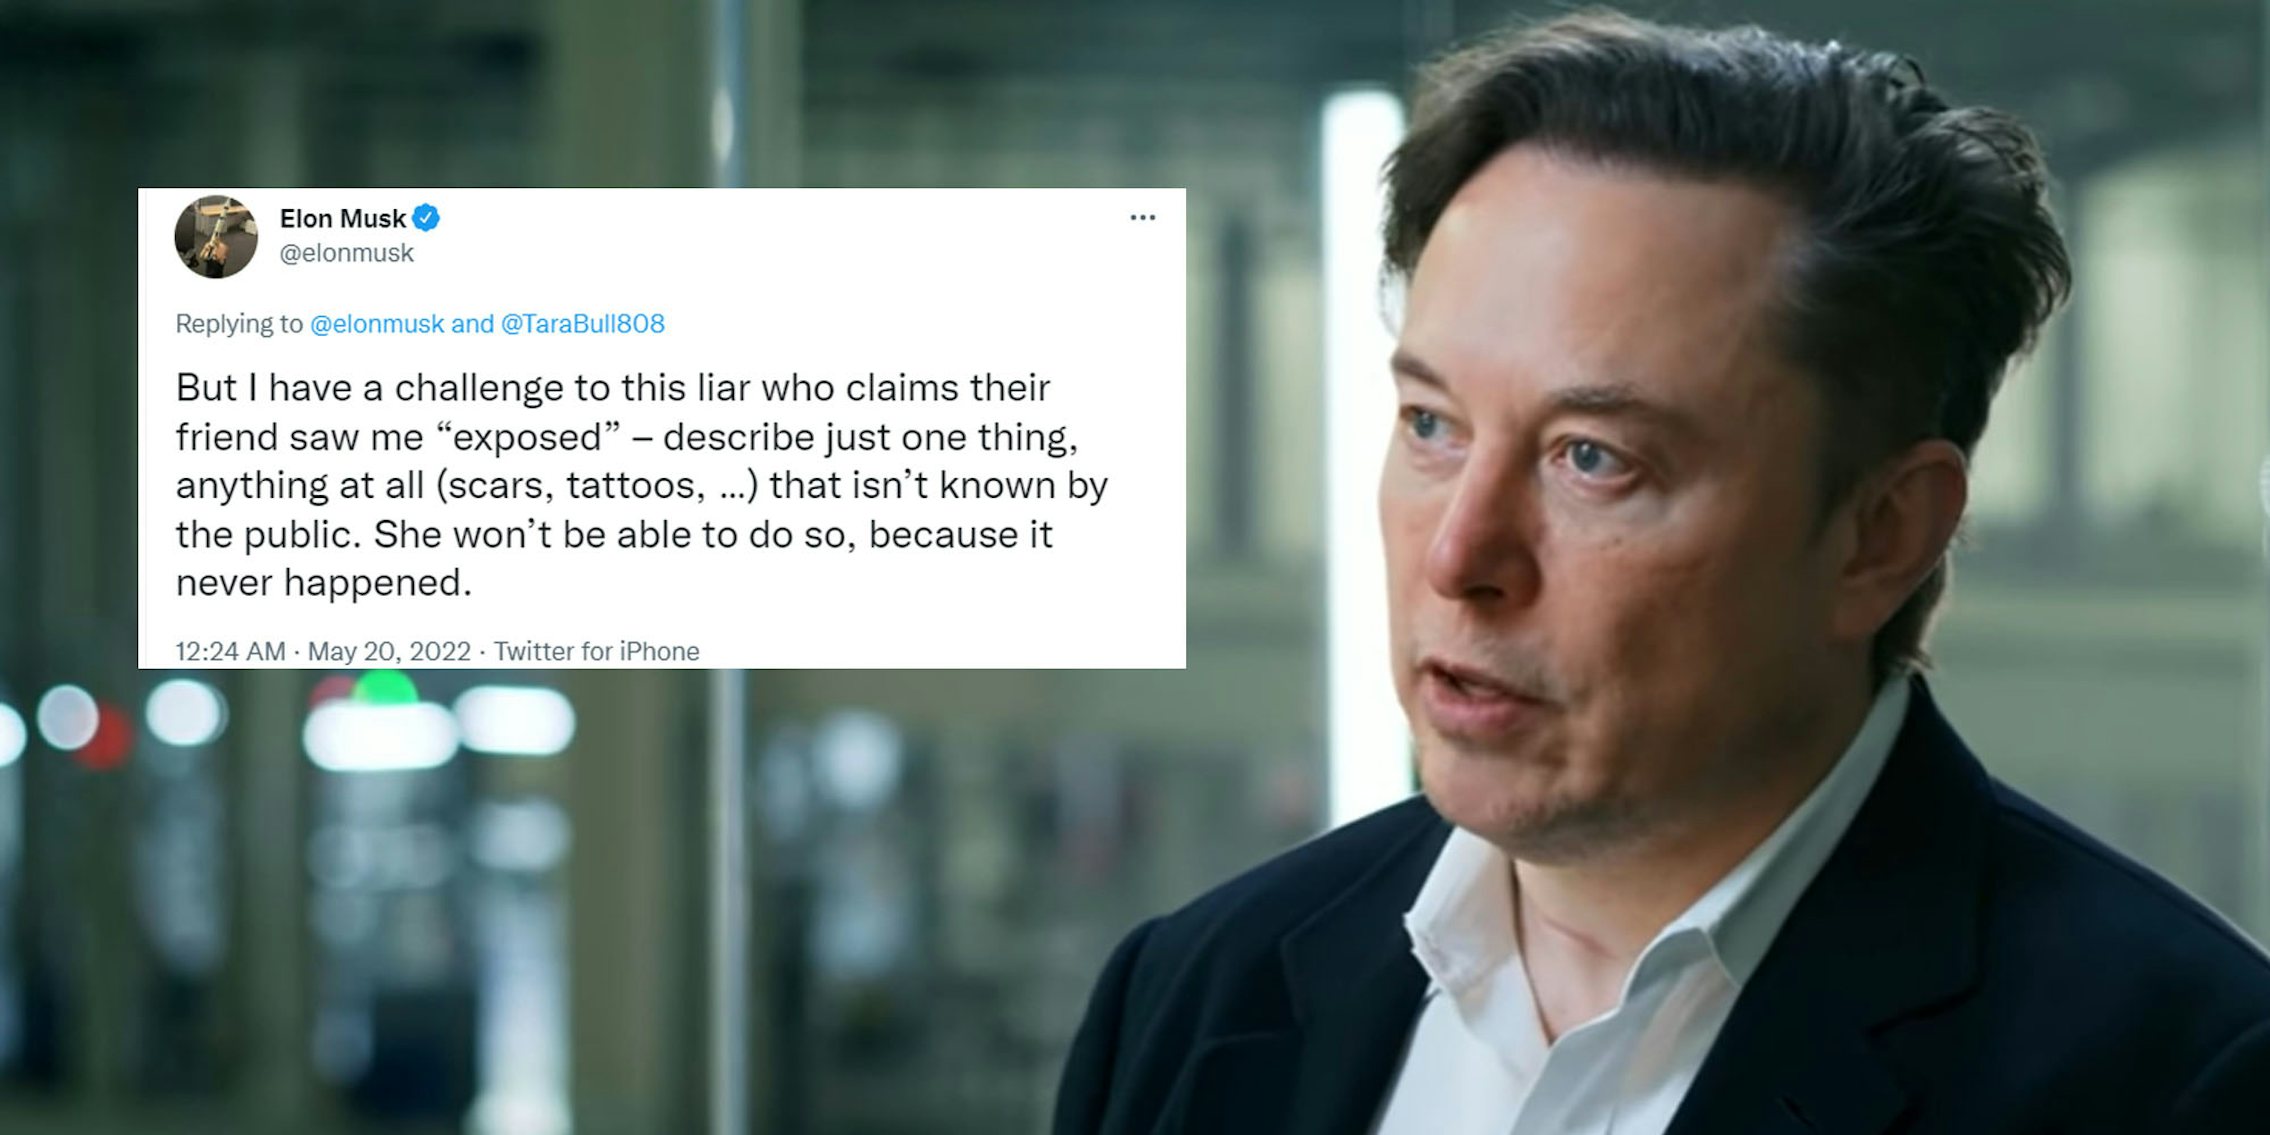 Elon musk speaking right Elon Musk tweet left caption 'But I have a challenge to this liar who claims their friend saw me 'exposed'- describe just one thing, anything at all (scars, tattoos, ...) that isn't known by the public. She won't be able to do so, because it never happened.'